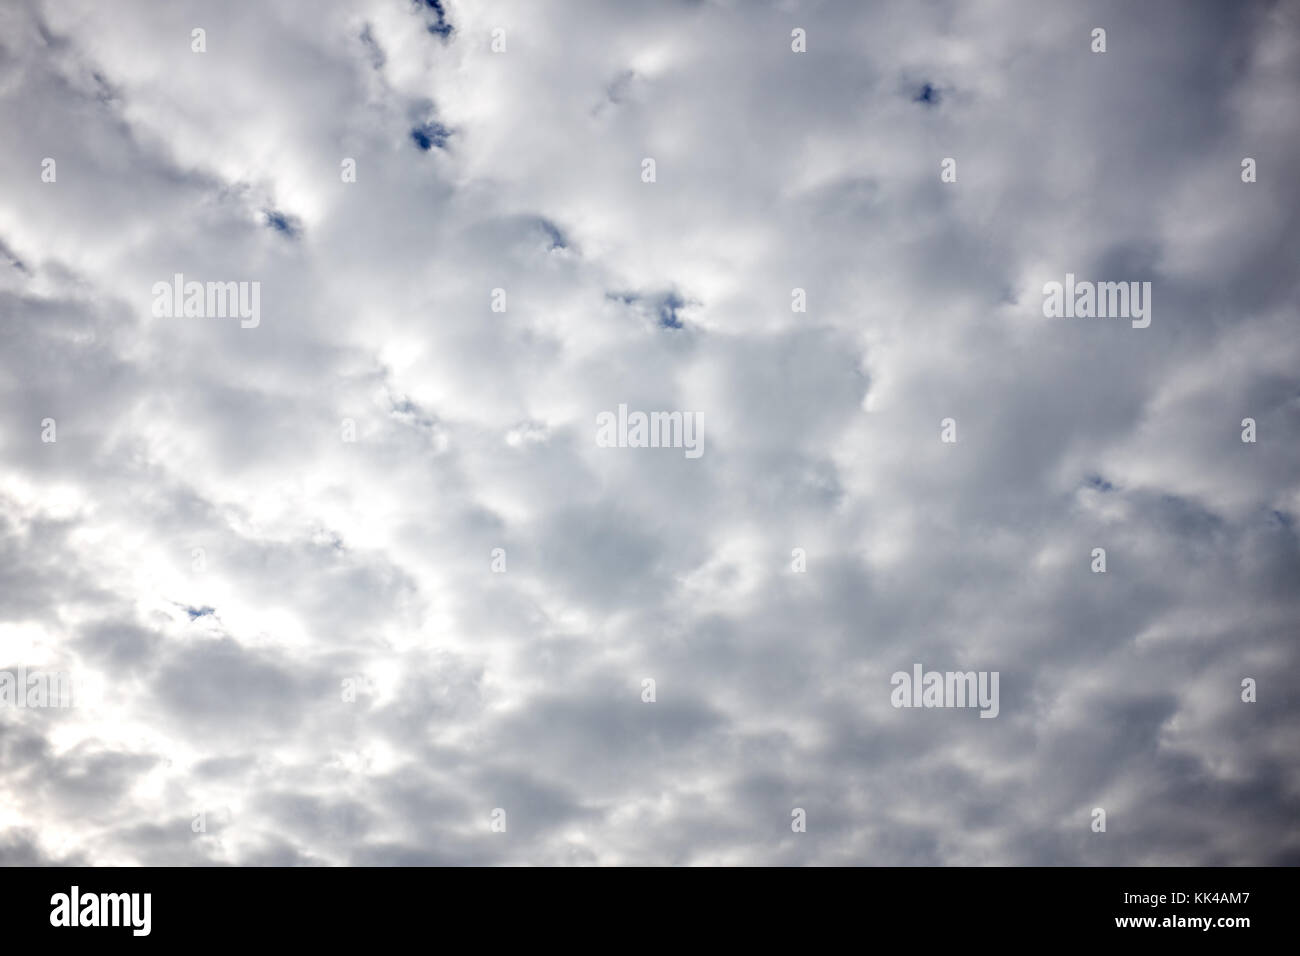 Cloudy overcast sky with cotton wool formations of white fluffy clouds in a dense cloud cover in a full frame view Stock Photo